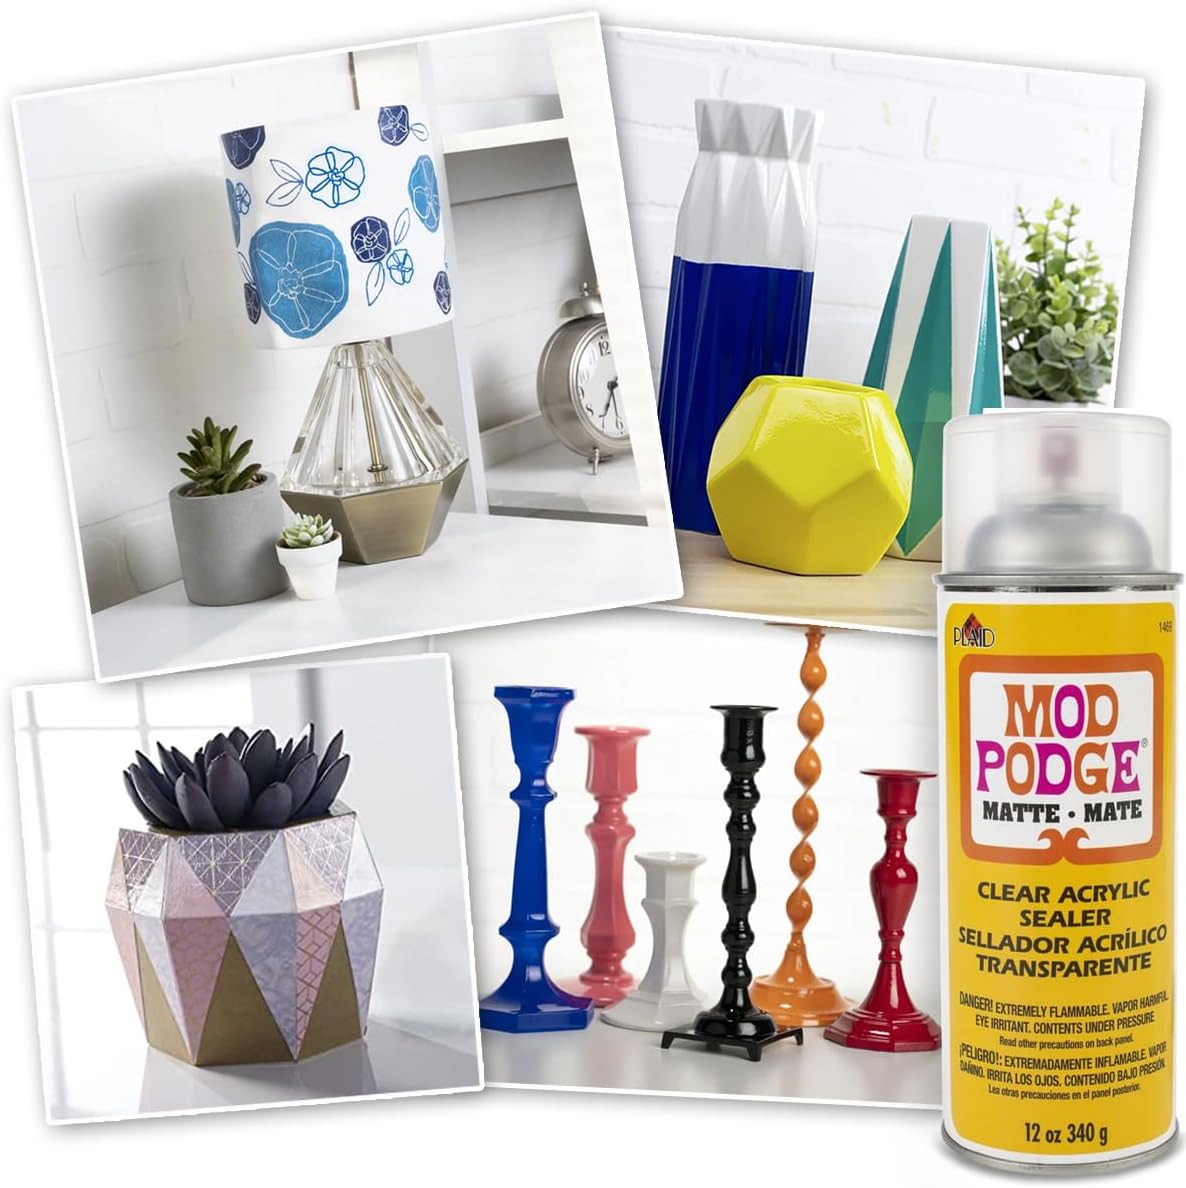 Mod Podge Spray Acrylic Sealer That is Specifically Formulated to Seal —  Grand River Art Supply